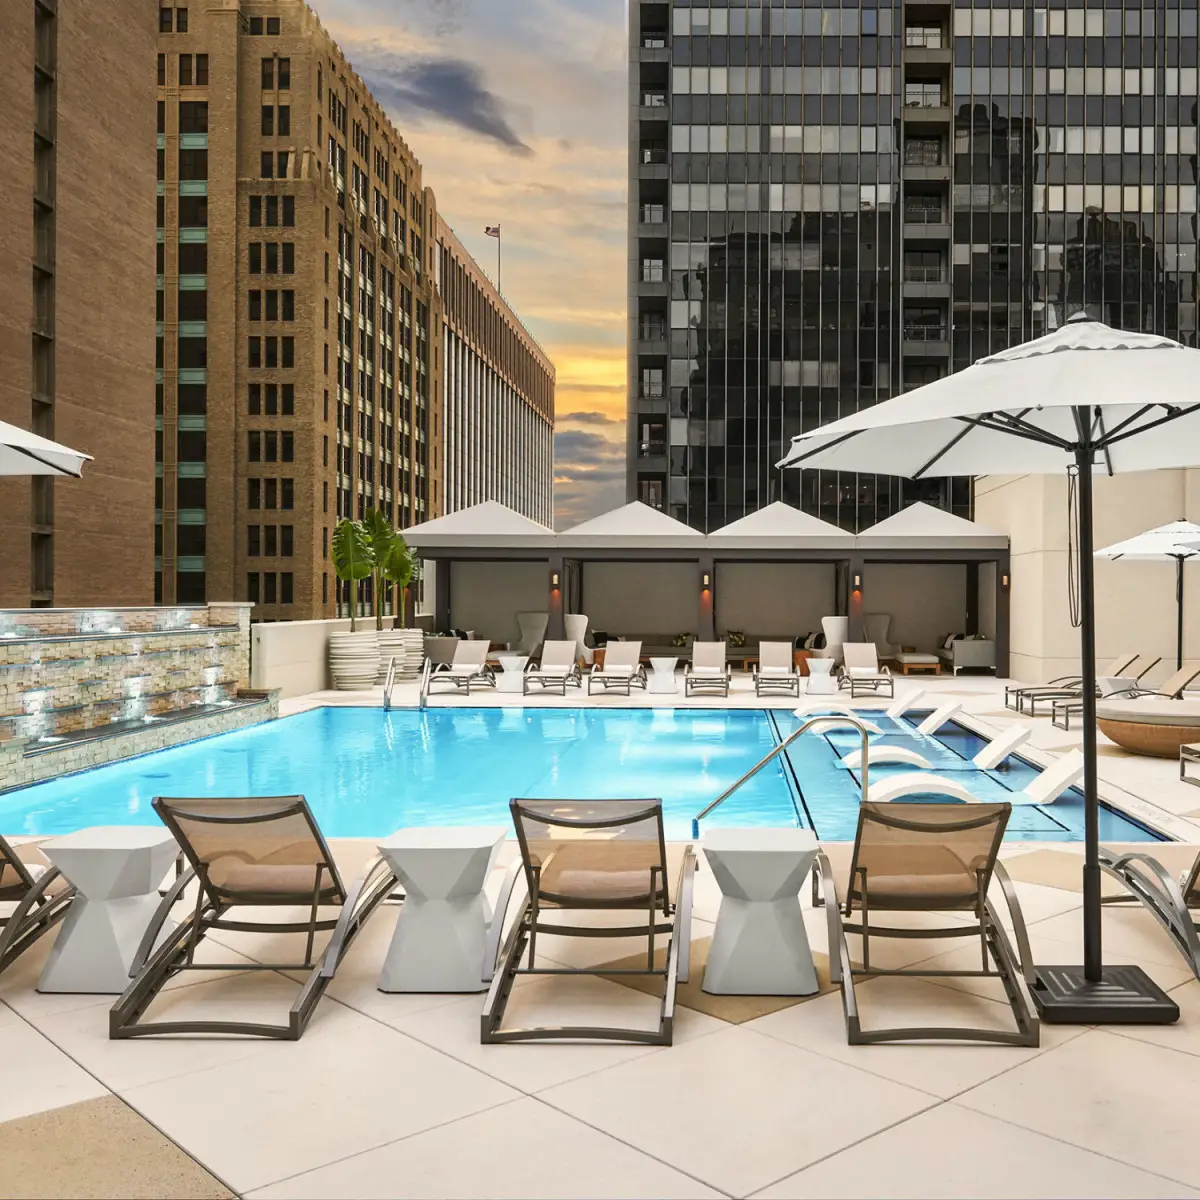 Book a summer vacation at these 10 Dallas hotels with fabulous pools ...